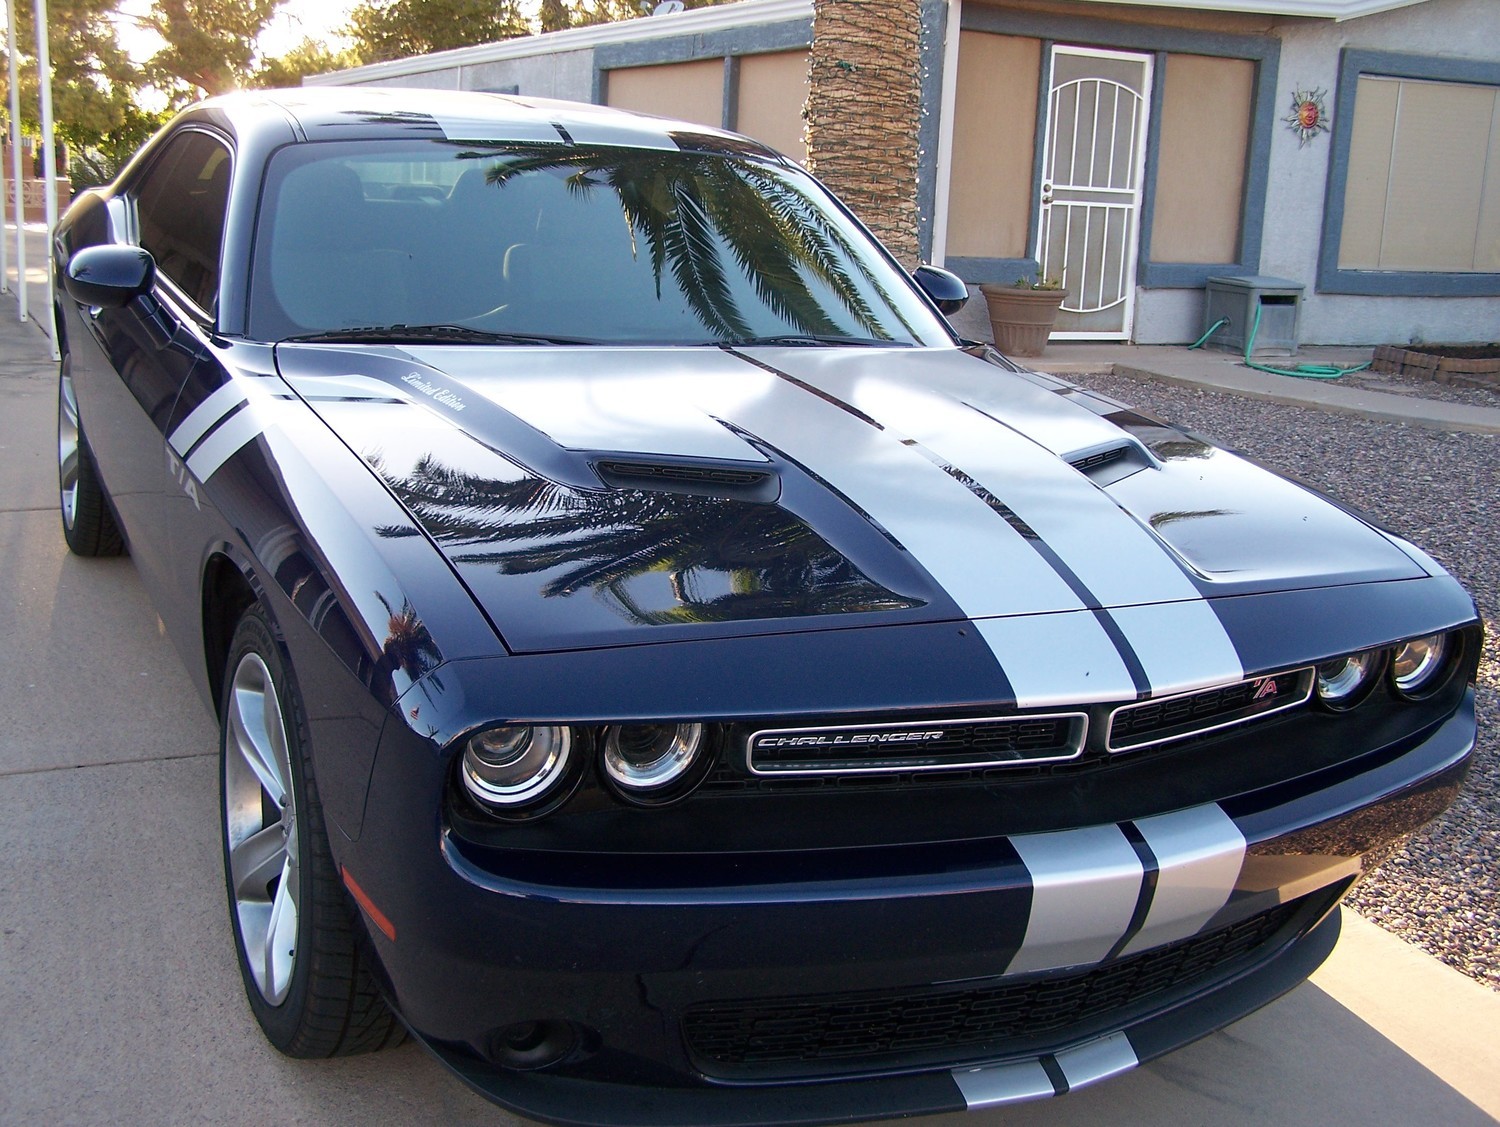 2015 - Up Dodge Challenger 16 piece Rally Stripe Decal Kit